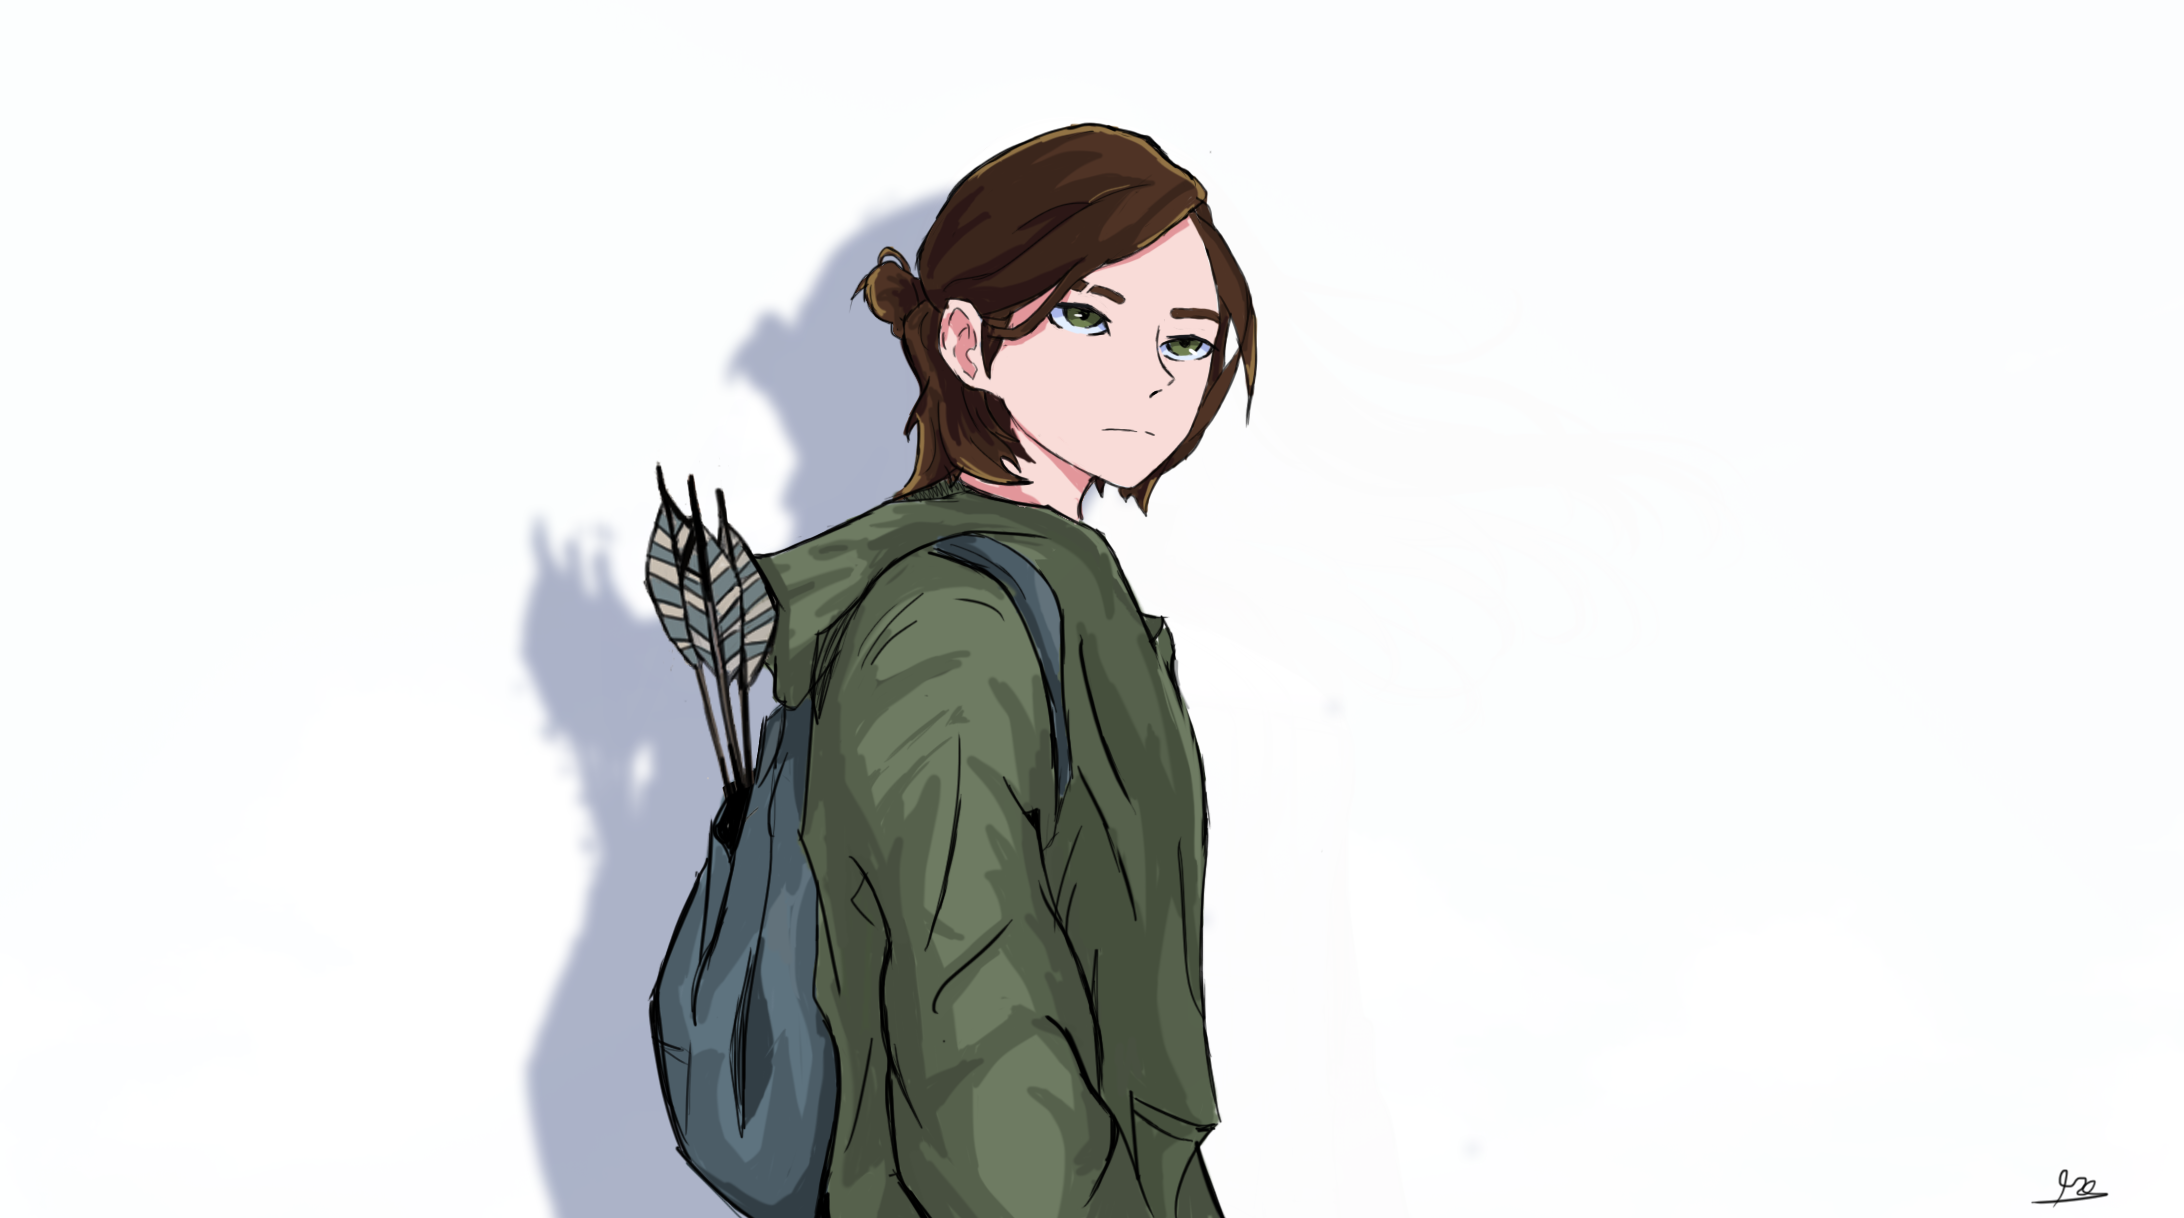 General 2184x1218 Ellie Williams The Last of Us 2 video games digital art Naughty Dog minimalism video game girls white background simple background